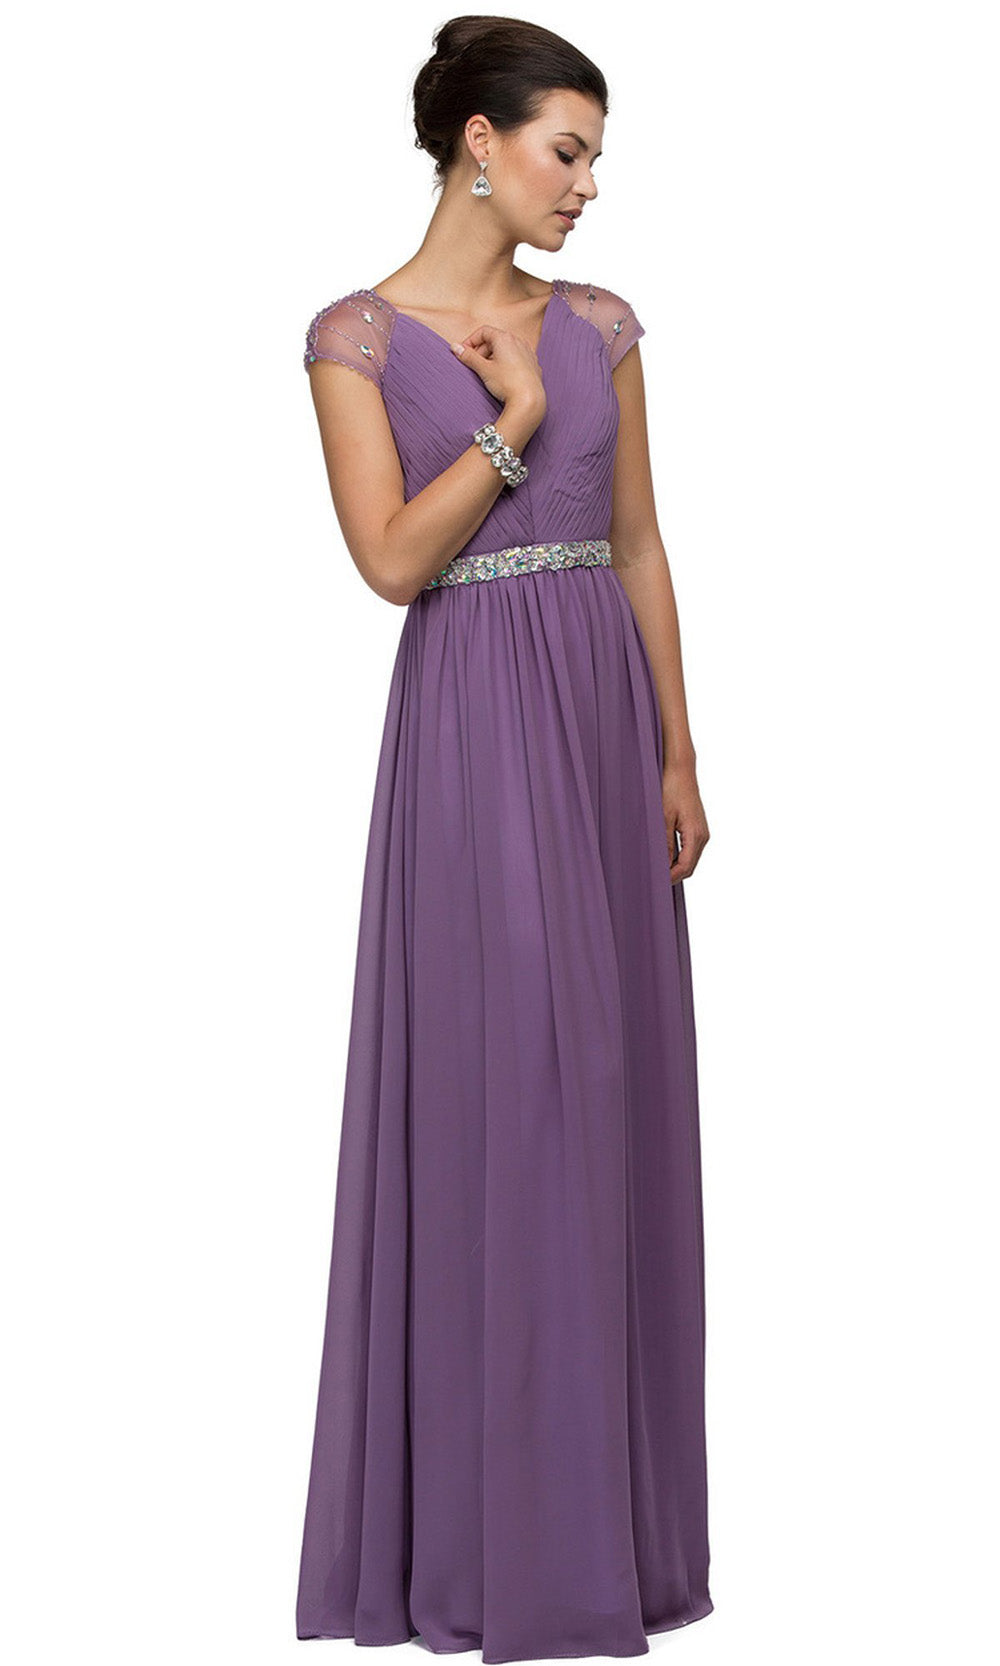 Dancing Queen Illusion Cap Sleeve Pleated V-Neck Chiffon Evening Dress 9182 CCSALE S / Dusty Lilac